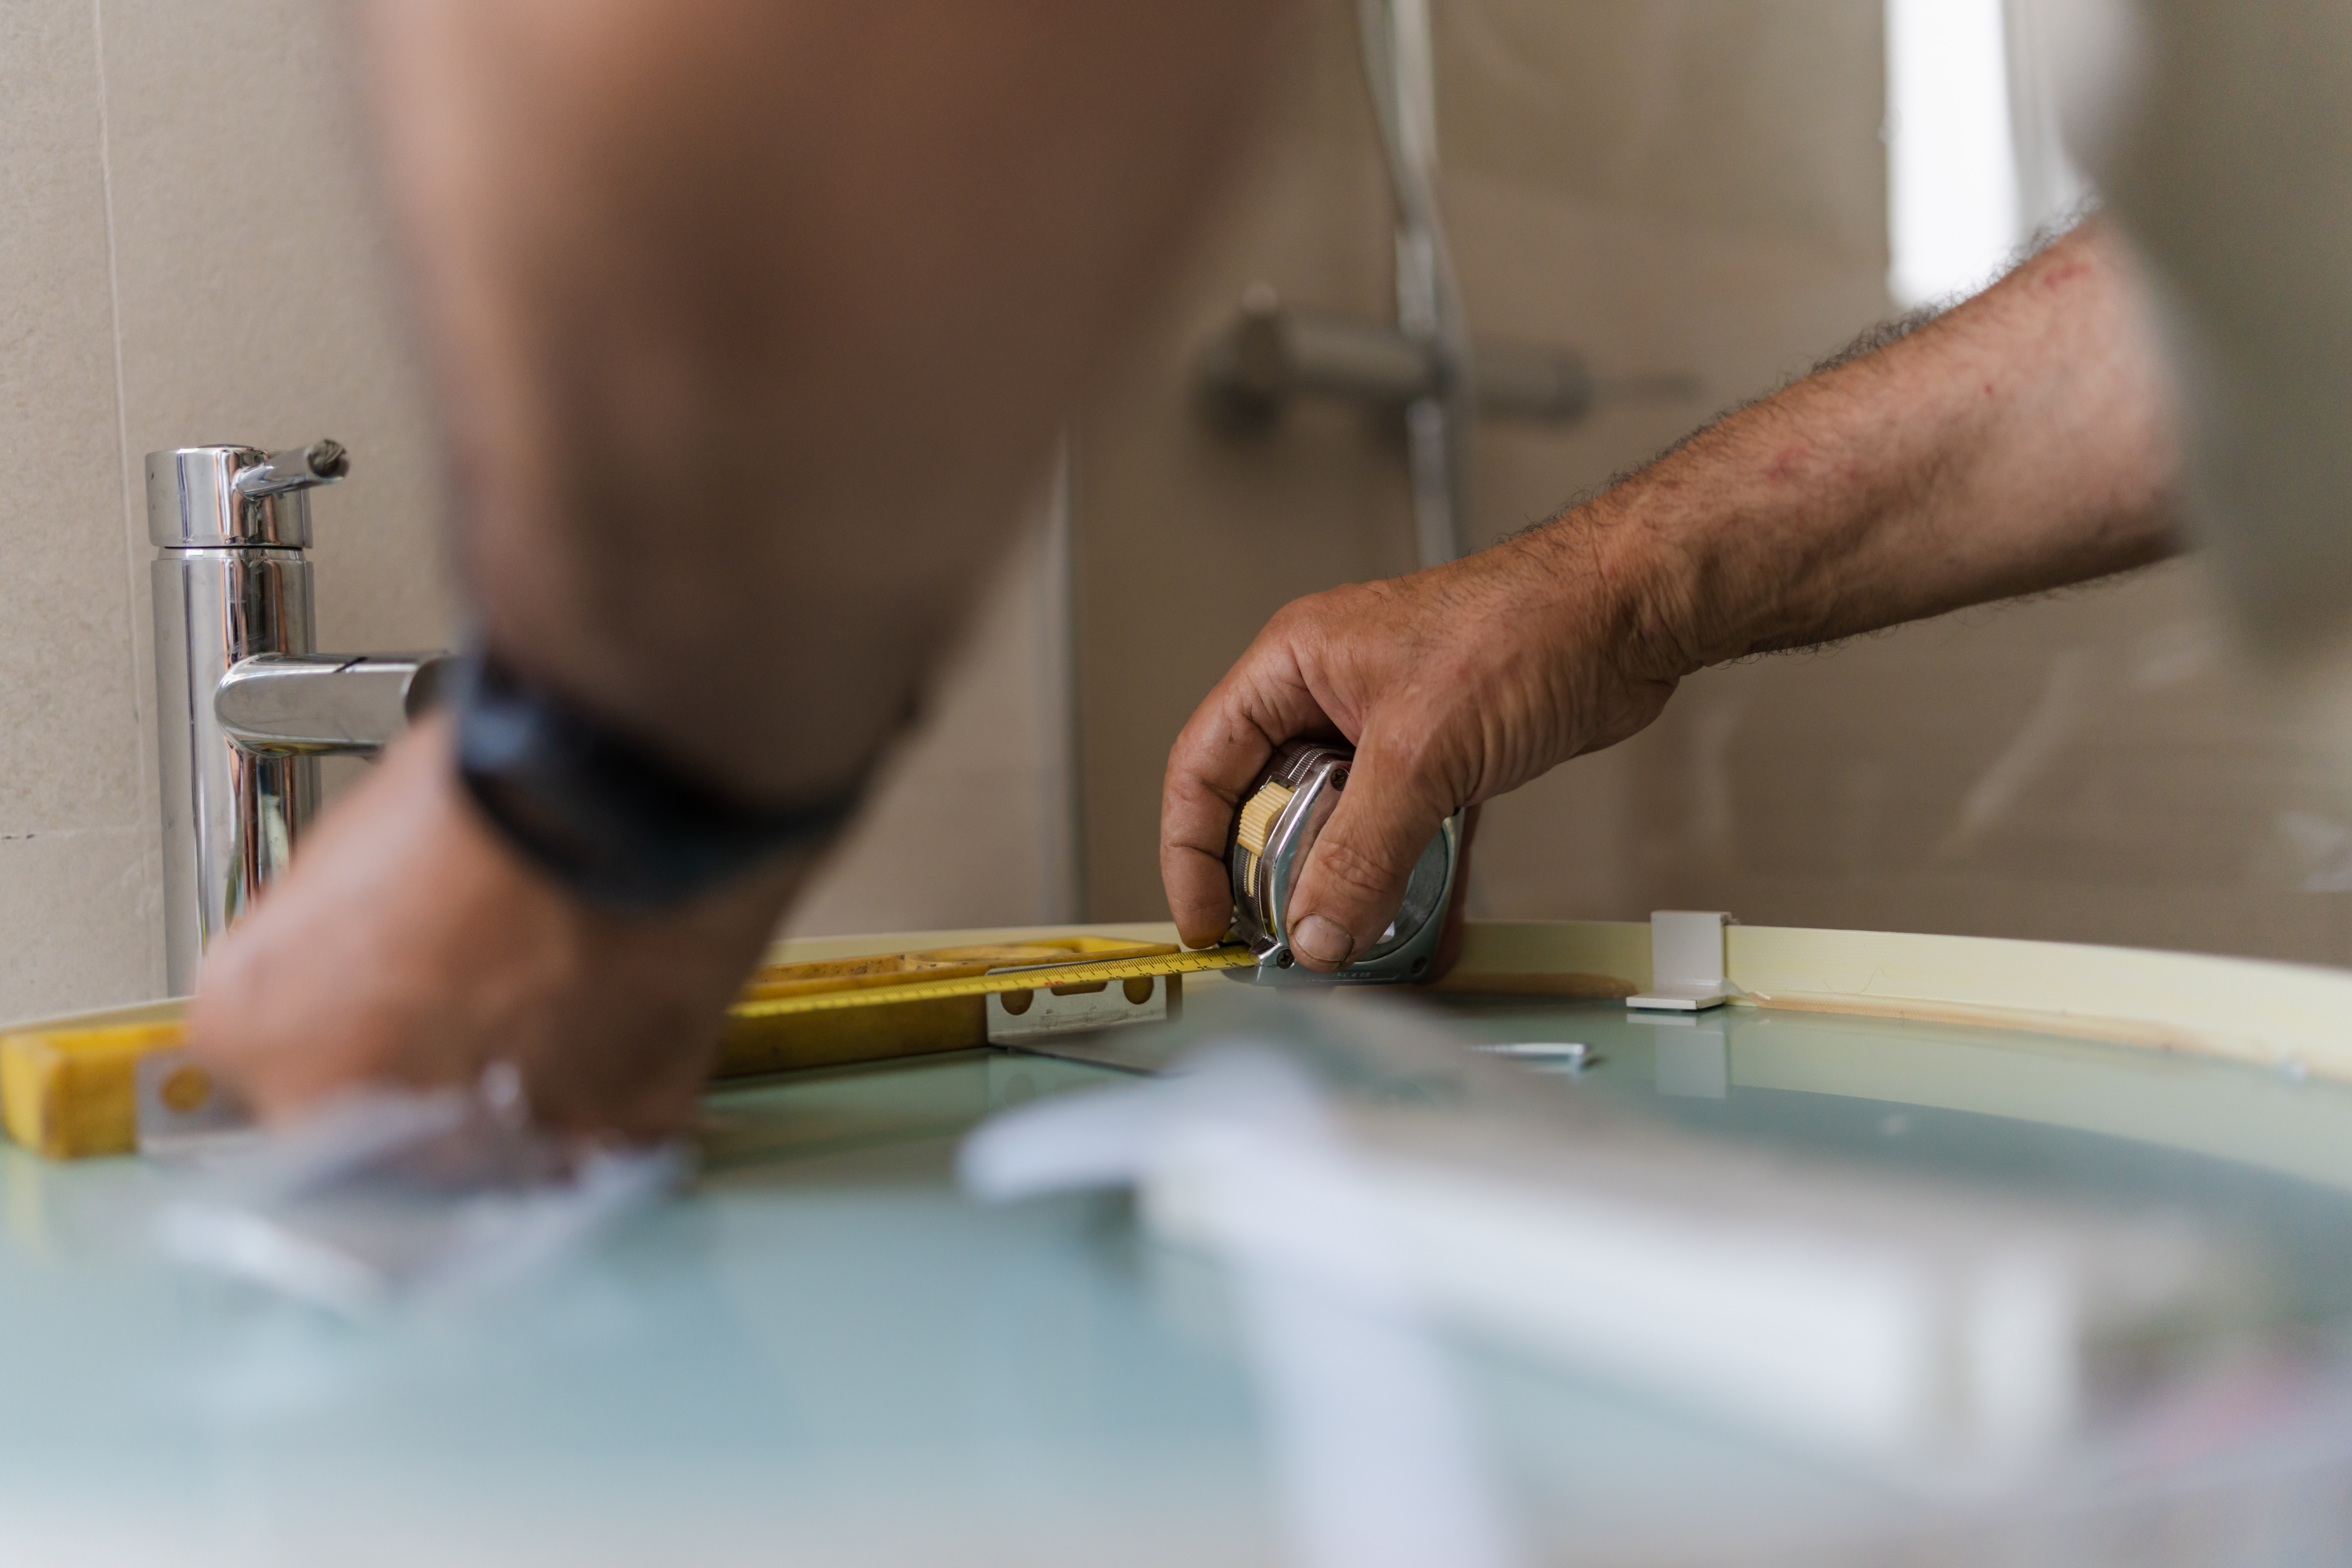 A man measuring a bathroom sink | Source: Getty Images